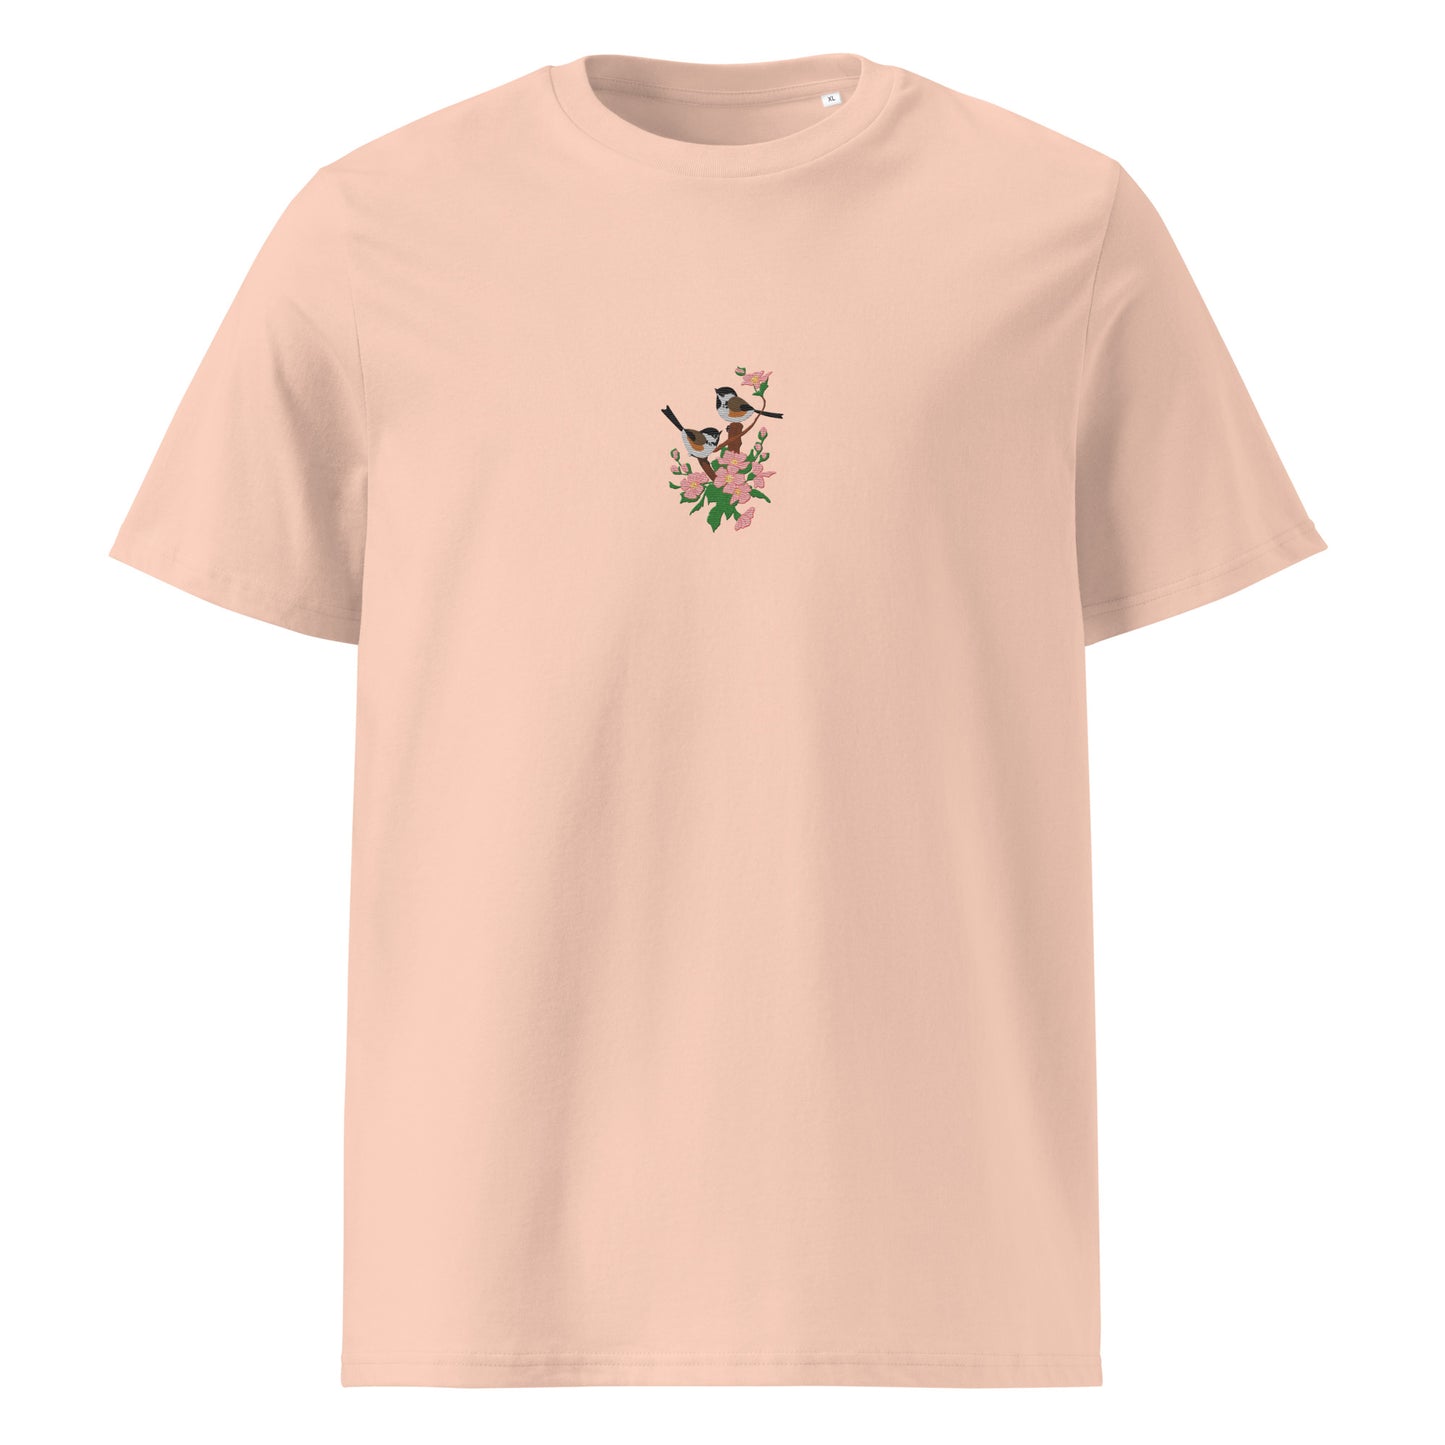 Coal Tits and cherry tree blossoms - Unisex organic cotton t-shirt